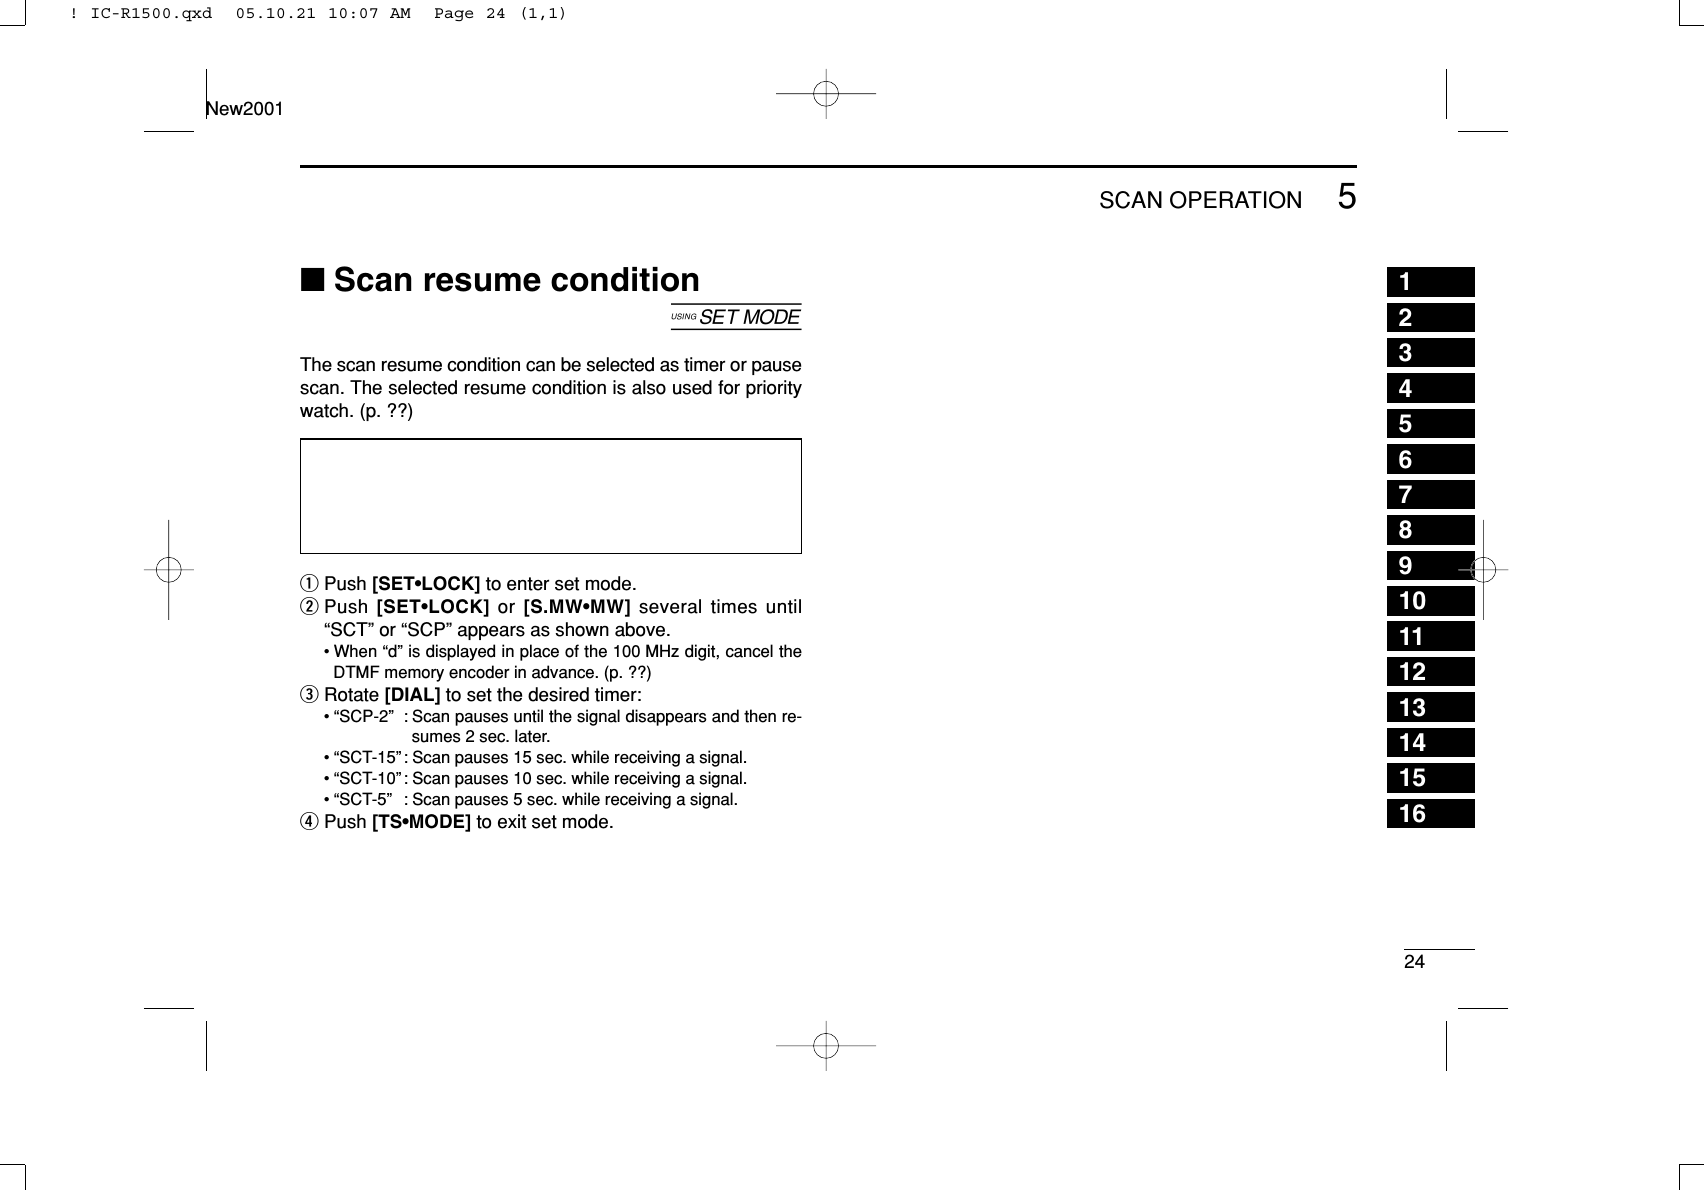 245SCAN OPERATIONNew200112345678910111213141516■Scan resume condition[The scan resume condition can be selected as timer or pausescan. The selected resume condition is also used for prioritywatch. (p. ??)qPush [SET•LOCK] to enter set mode.wPush [SET•LOCK] or  [S.MW•MW] several times until“SCT” or “SCP” appears as shown above.• When “d” is displayed in place of the 100 MHz digit, cancel theDTMF memory encoder in advance. (p. ??)eRotate [DIAL] to set the desired timer:• “SCP-2” : Scan pauses until the signal disappears and then re-sumes 2 sec. later.• “SCT-15” : Scan pauses 15 sec. while receiving a signal.• “SCT-10” : Scan pauses 10 sec. while receiving a signal.• “SCT-5” : Scan pauses 5 sec. while receiving a signal.rPush [TS•MODE] to exit set mode.! IC-R1500.qxd  05.10.21 10:07 AM  Page 24 (1,1)